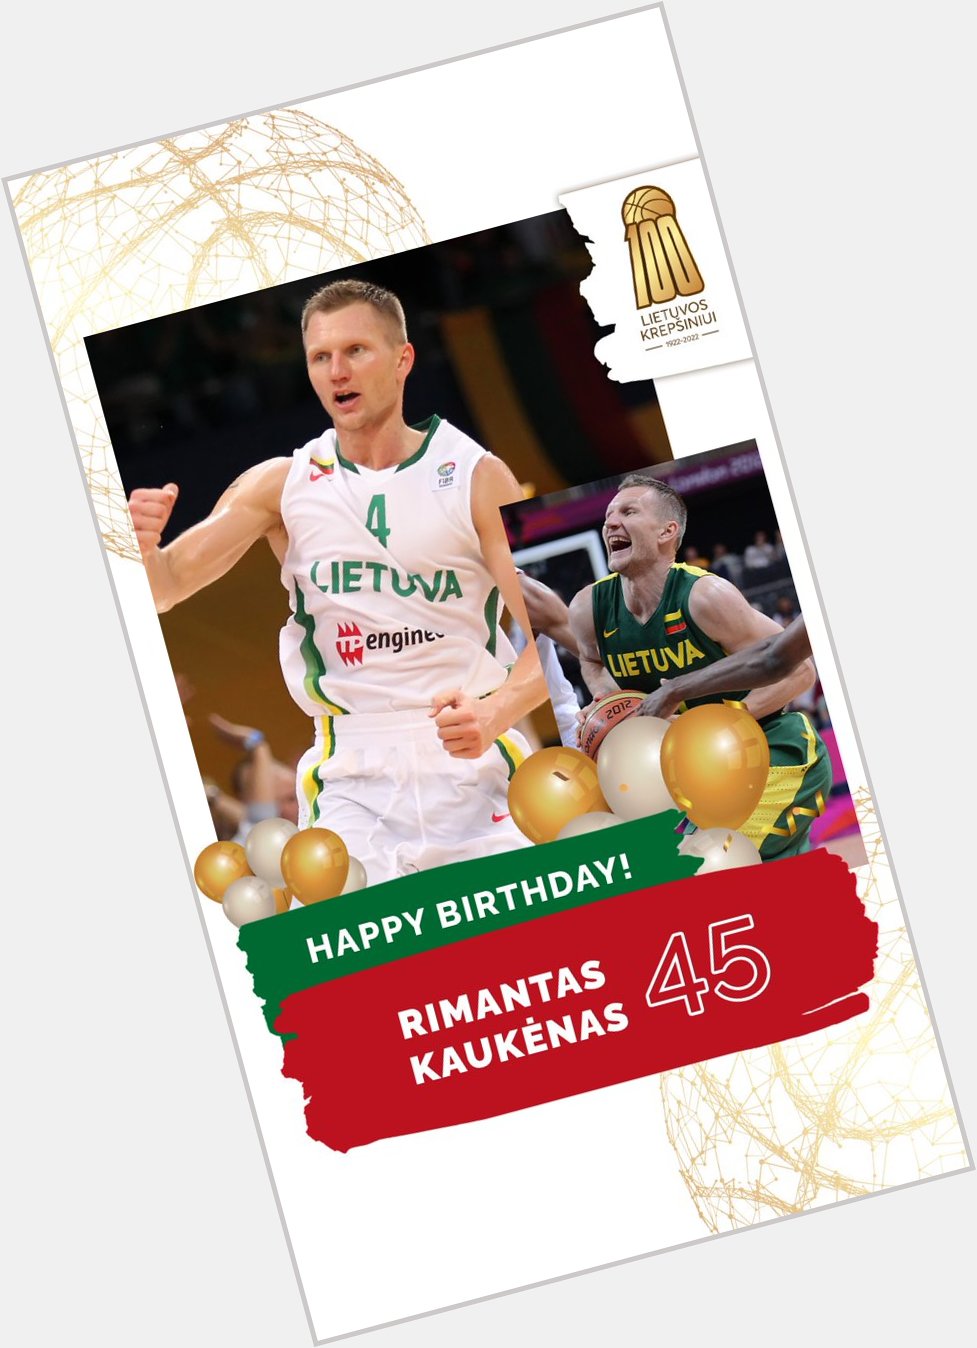 Happy birthday to Rimantas Kauk nas! 

All the best to you in your new role as basketball executive 